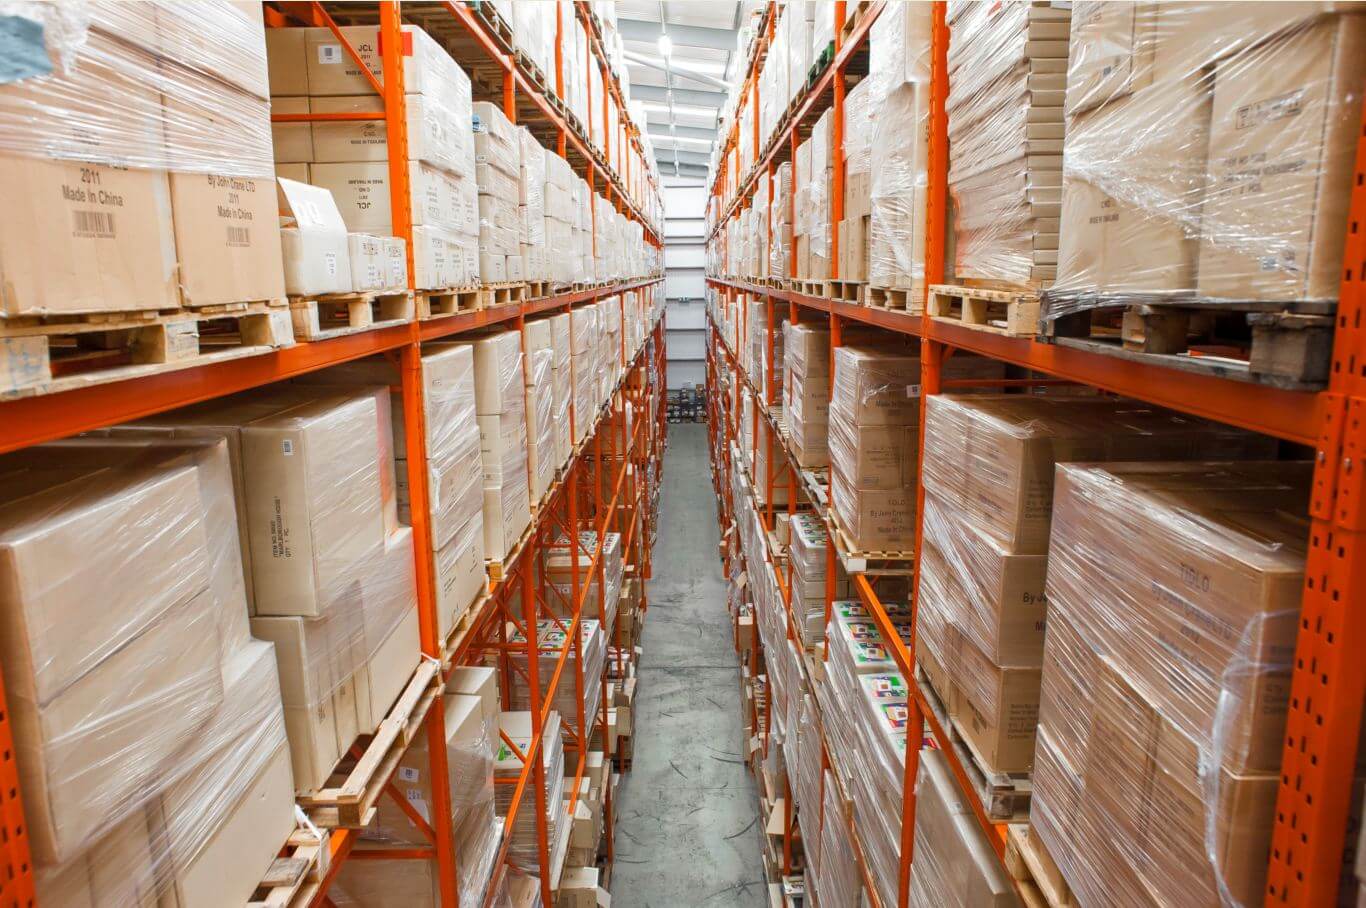 Pallet Racking Relocations, Pallet Racking Storage, Double Deep Pallet Racking, Pallet Racking, Pallet Racking UK, Pallet Racking North, Pallet Racking North West, Pallet Racking North East, Pallet Racking County Durham, Manchester Pallet Racking, Redirack Pallet Racking, Redirack Pallet Racking UK, Redirack Pallet Racking North, Redirack Pallet Racking North West, Redirack Pallet Racking North East, Redirack Pallet Racking County Durham